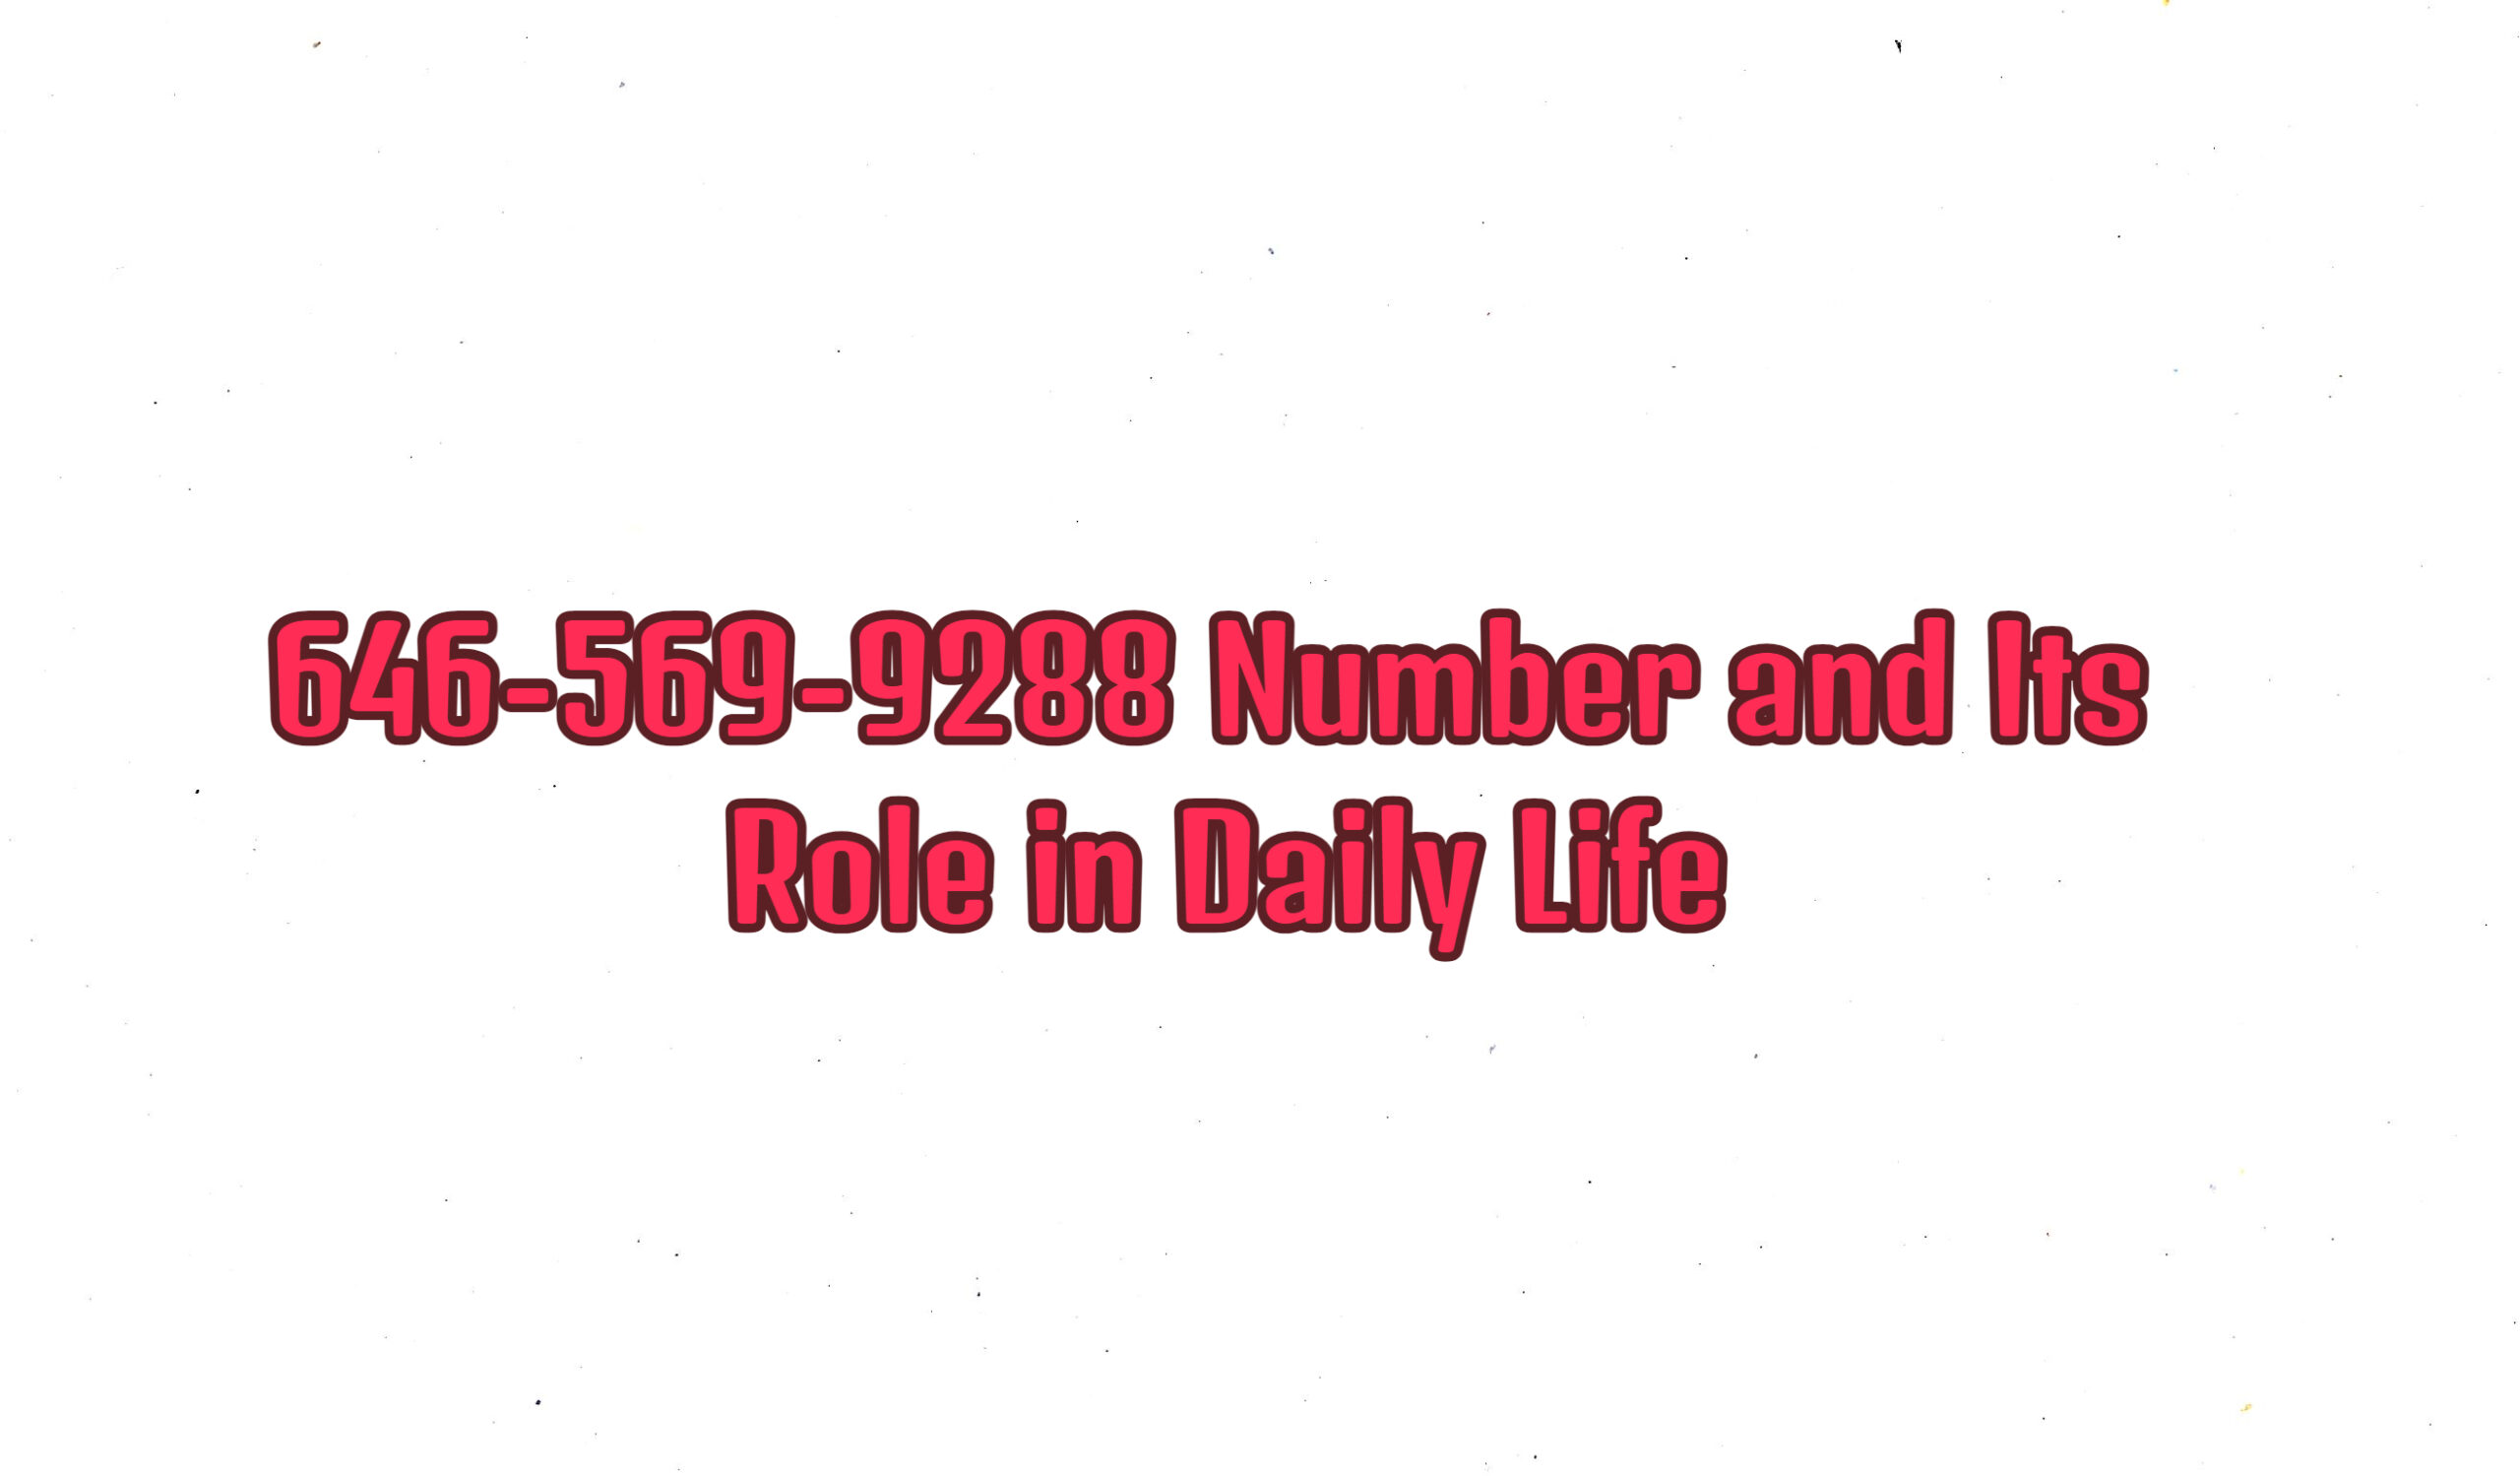 646-569-9288 Number and Its Role in Daily Life